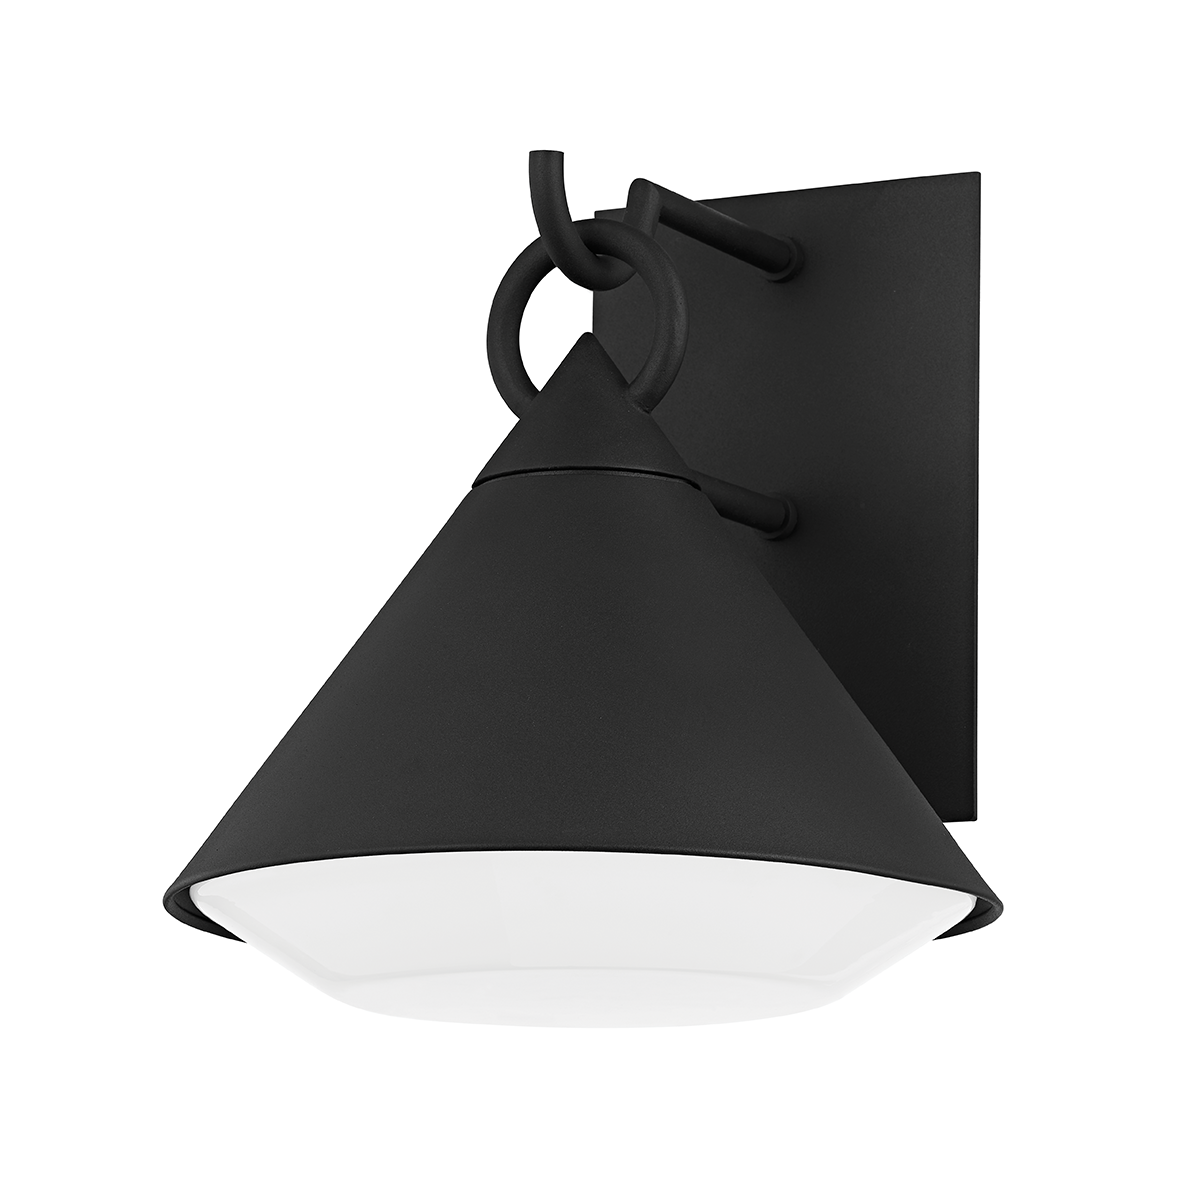 Troy Lighting Catalina Wall Sconce Wall Sconce Troy Lighting TEXTURED BLACK 11.5x11.5x12.75 